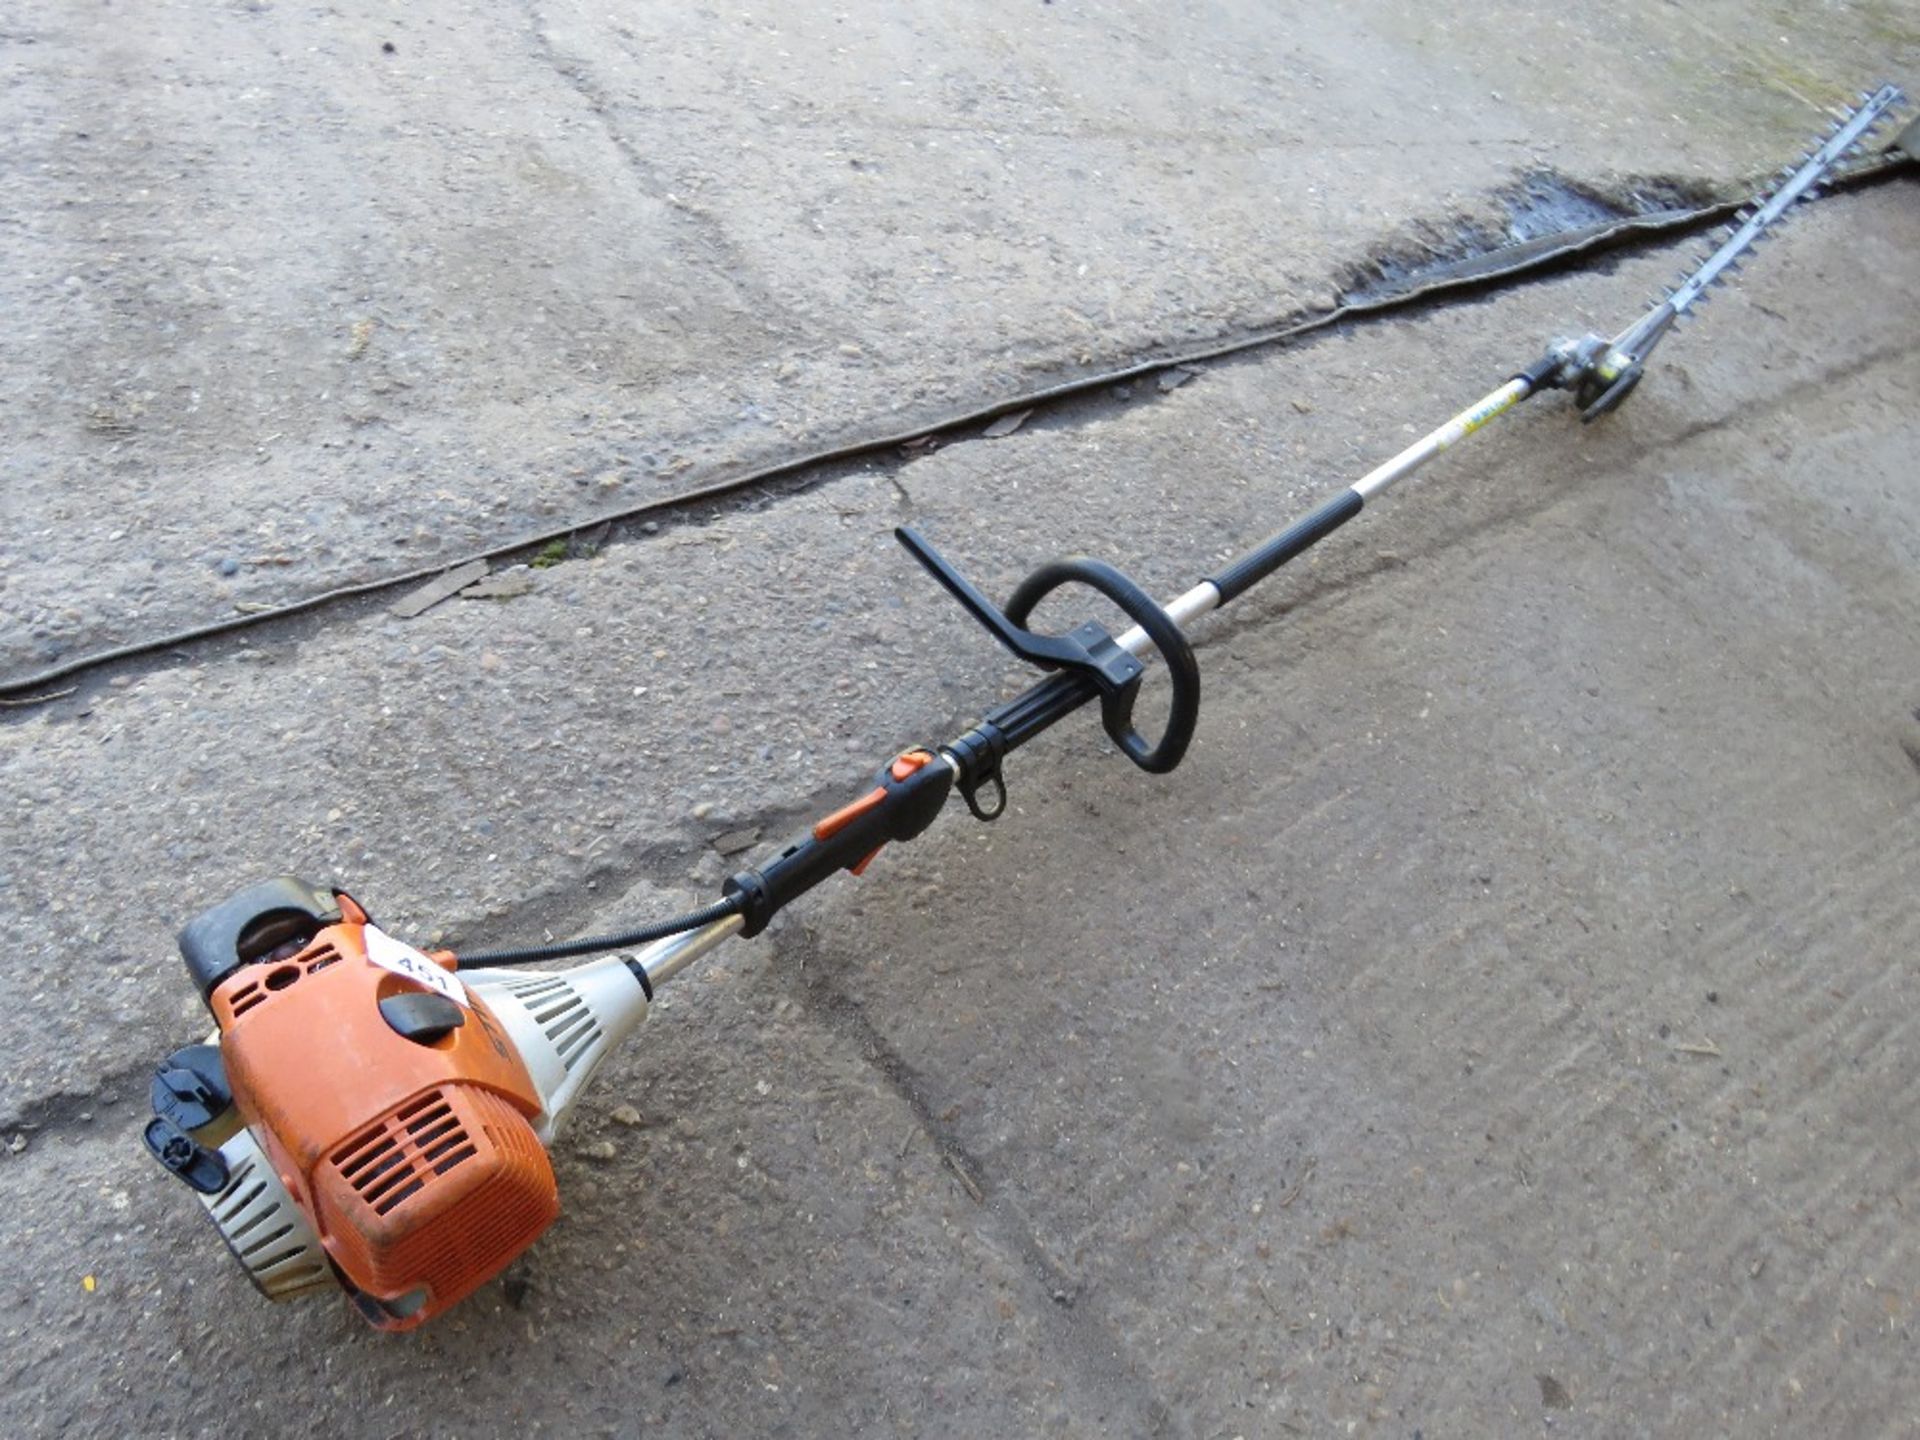 STIHL LONG REACH PETROL ENGINED HEDGE CUTTER. THIS LOT IS SOLD UNDER THE AUCTIONEERS MARGIN SCHEM